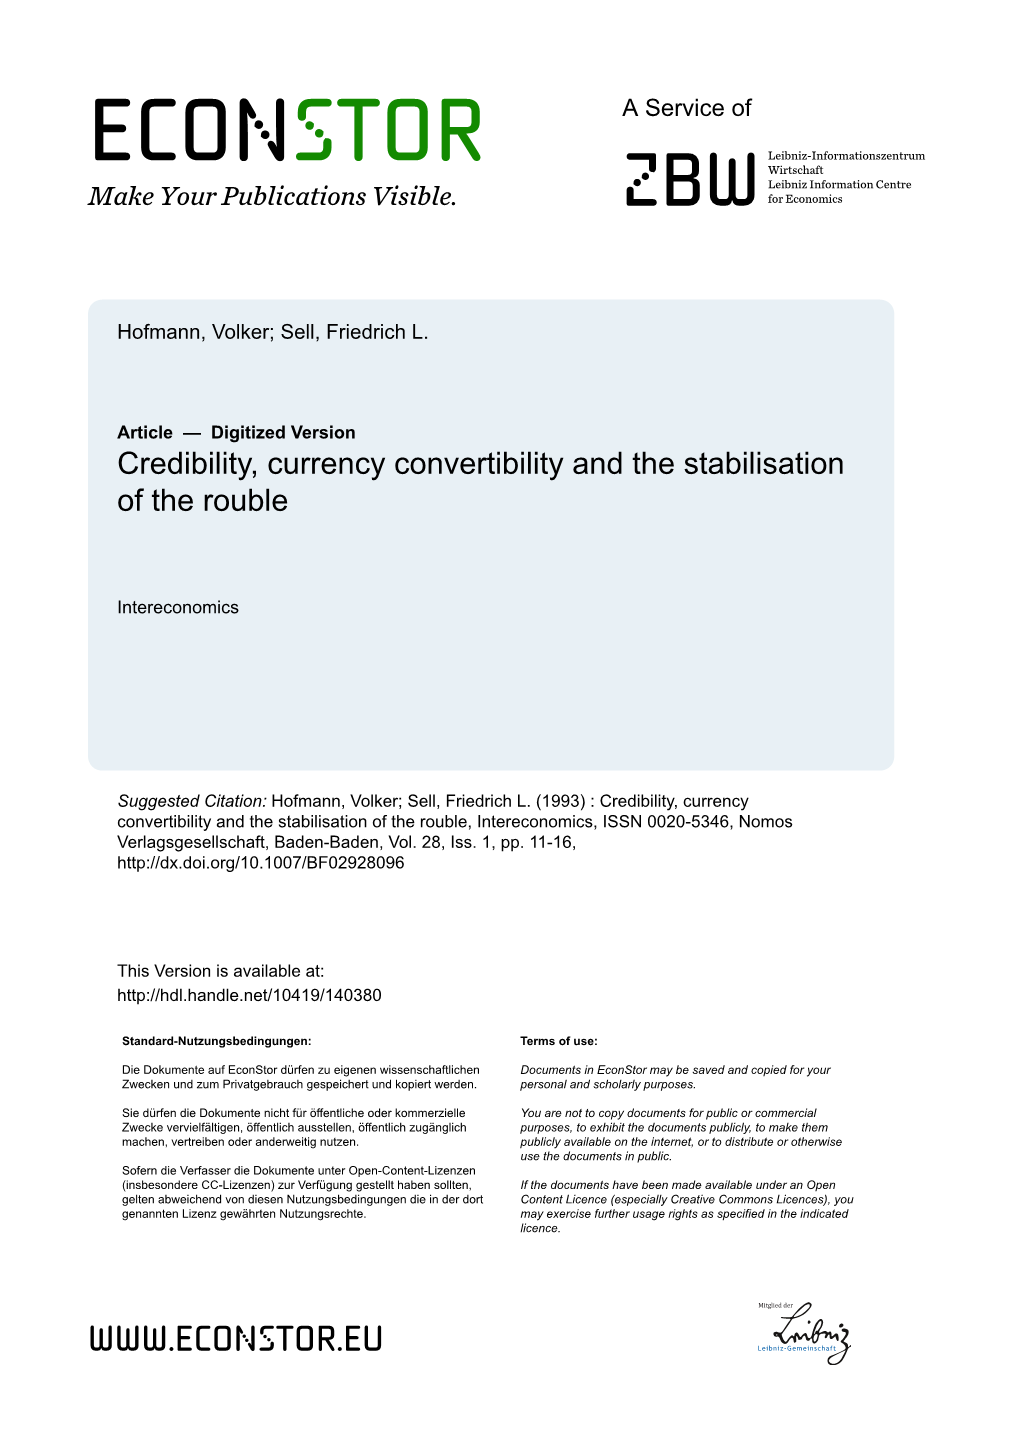 Credibility, Currency Convertibility and the Stabilisation of the Rouble